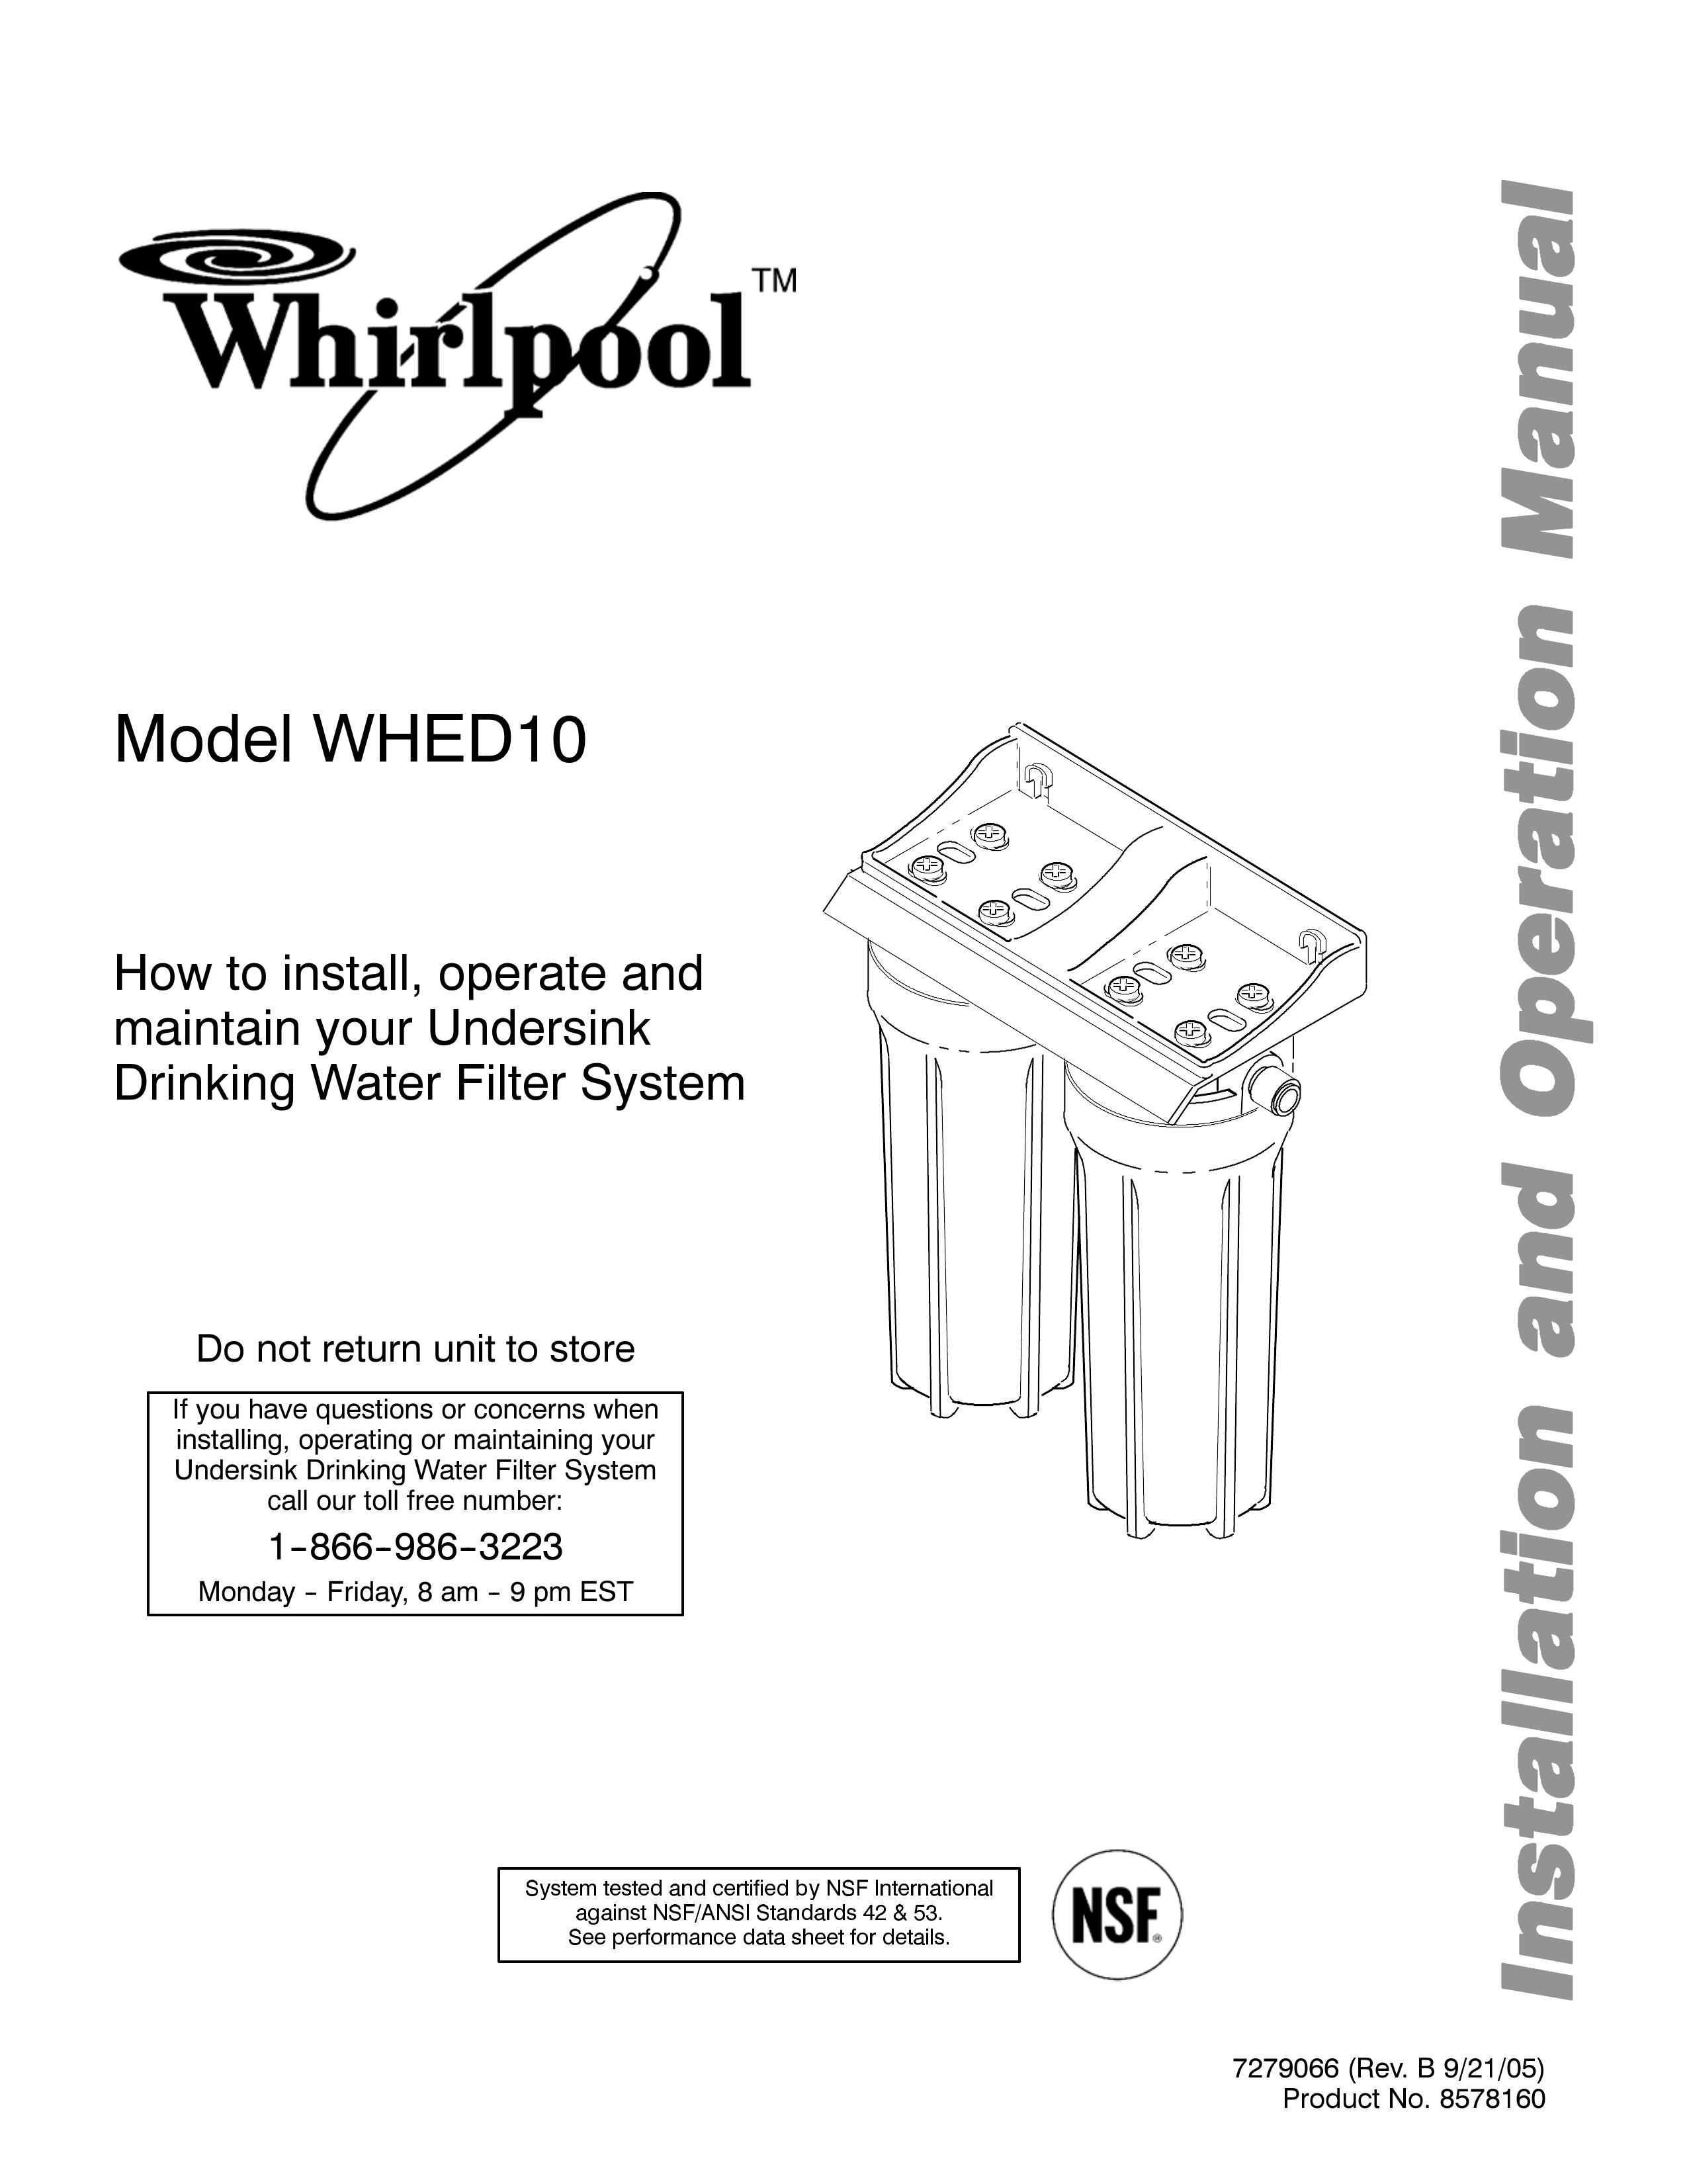 Whirlpool WHED10 Water Dispenser User Manual